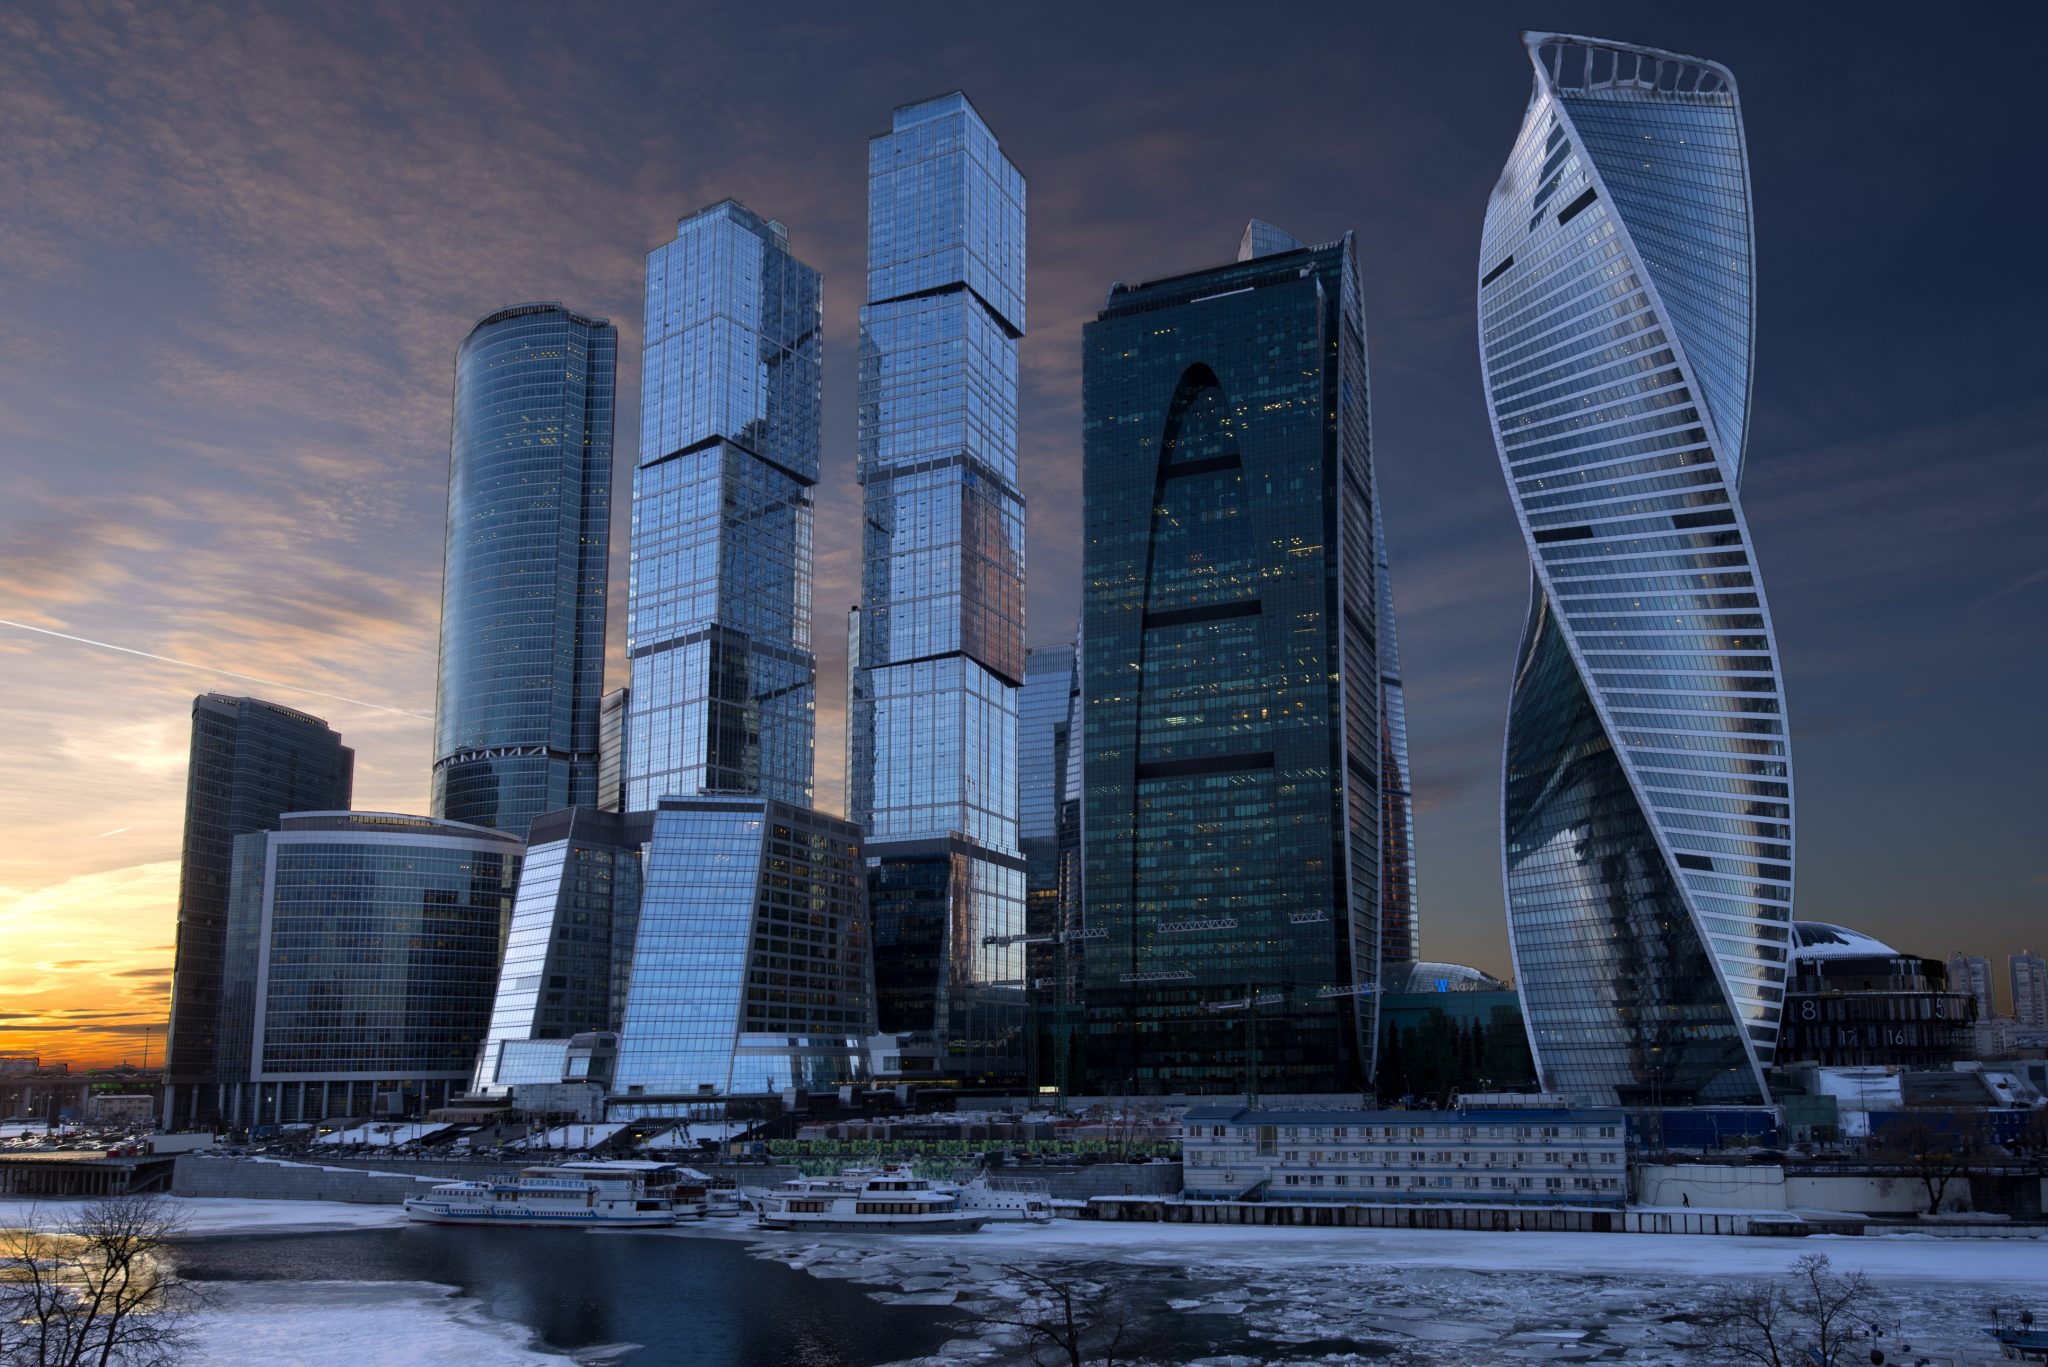 Moscow Skyscrapers At Sunset.